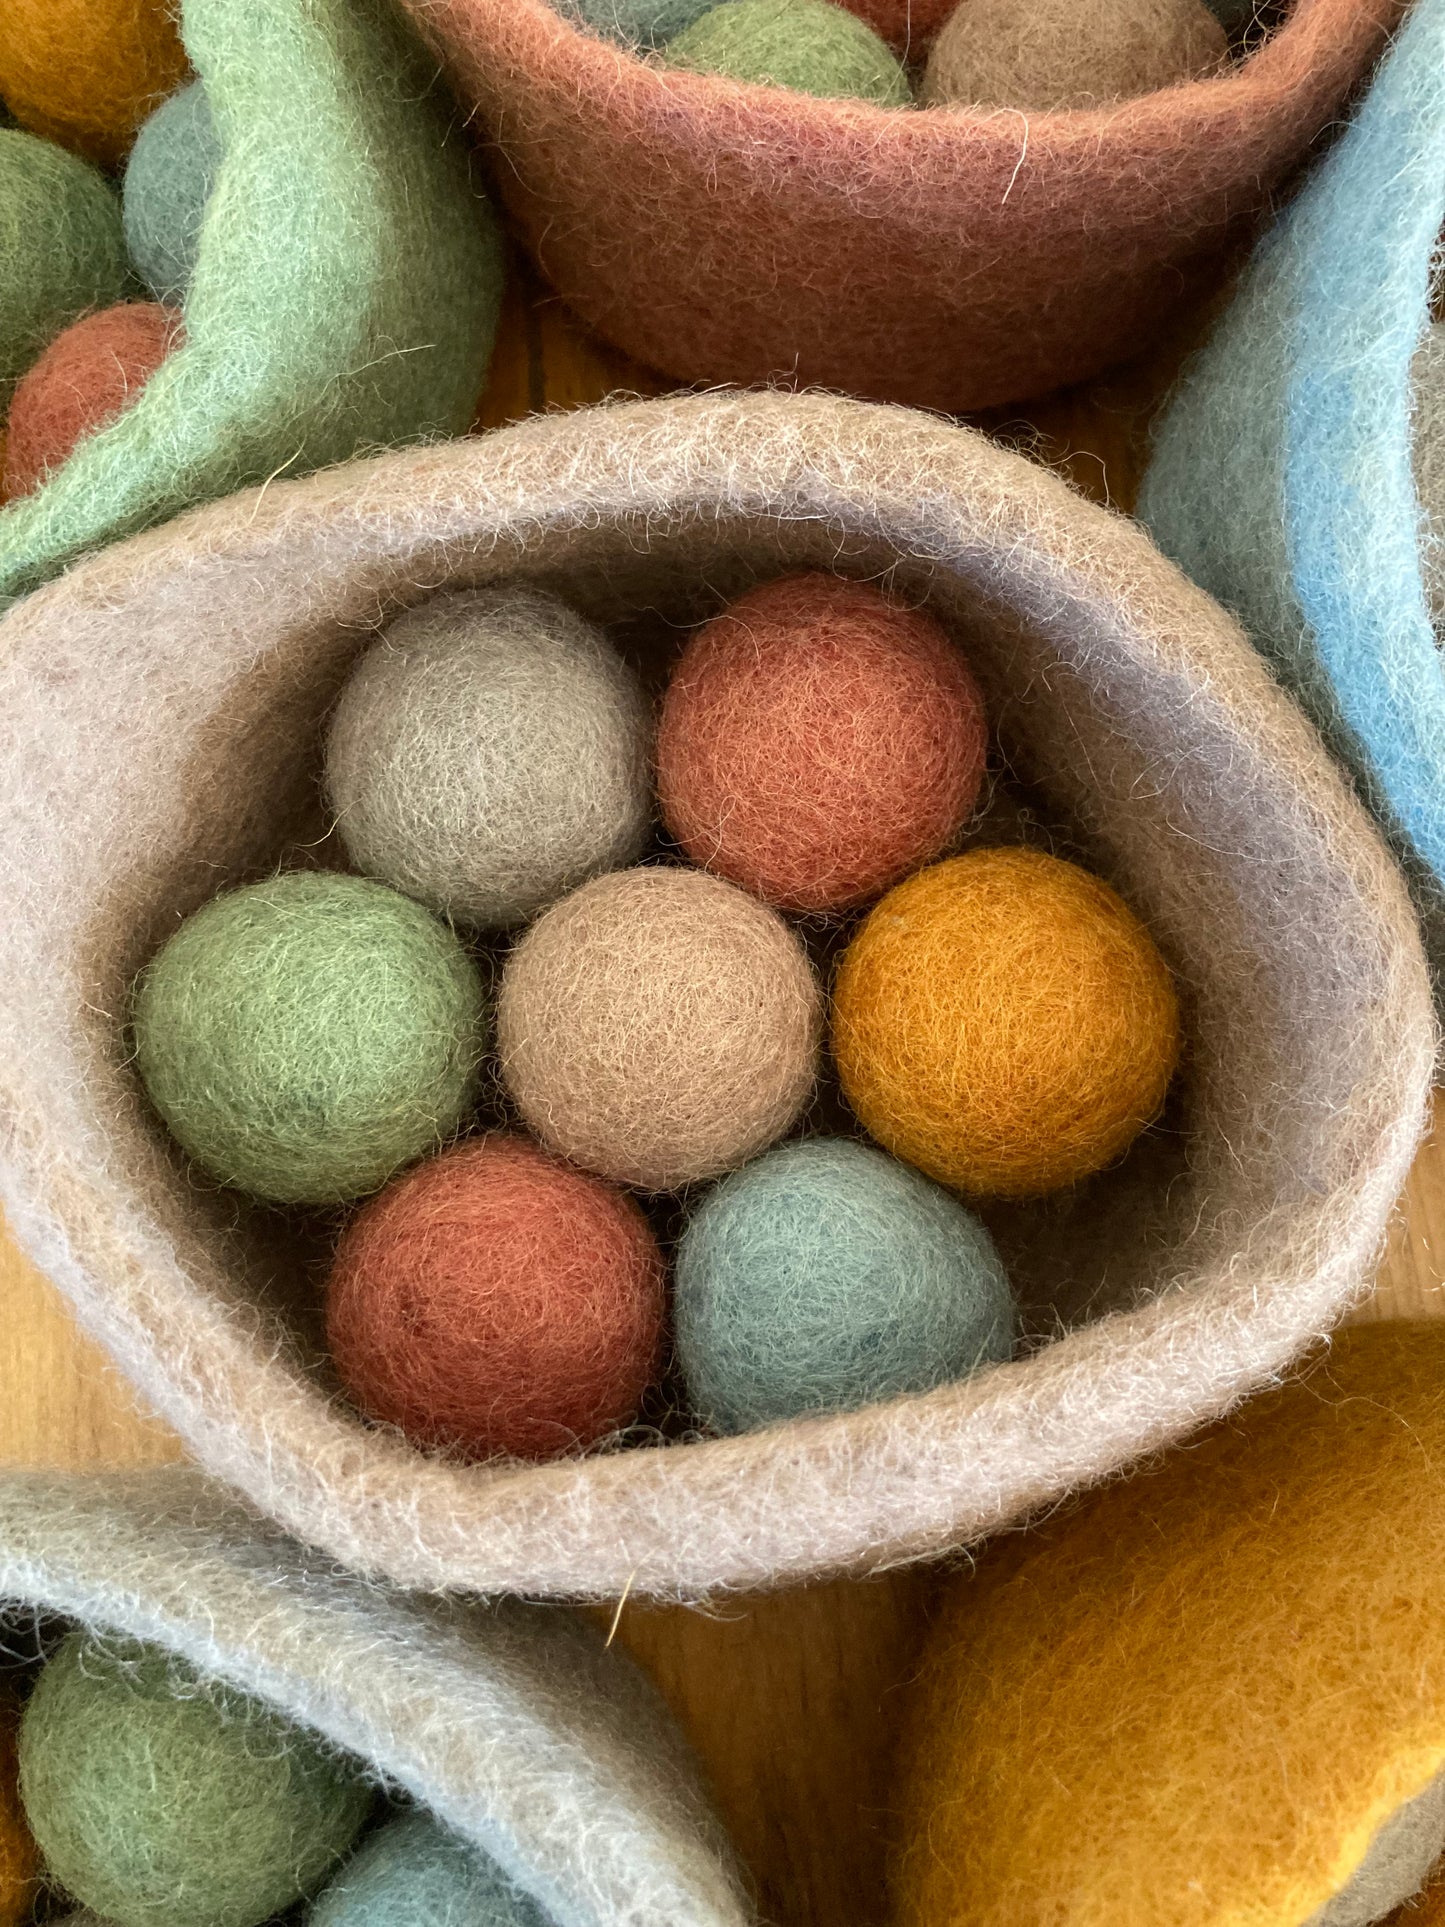 Felted Toys for Baby and Dollhouse Play Set - EARTH TONES WOOL BALLS and FELT BOWL